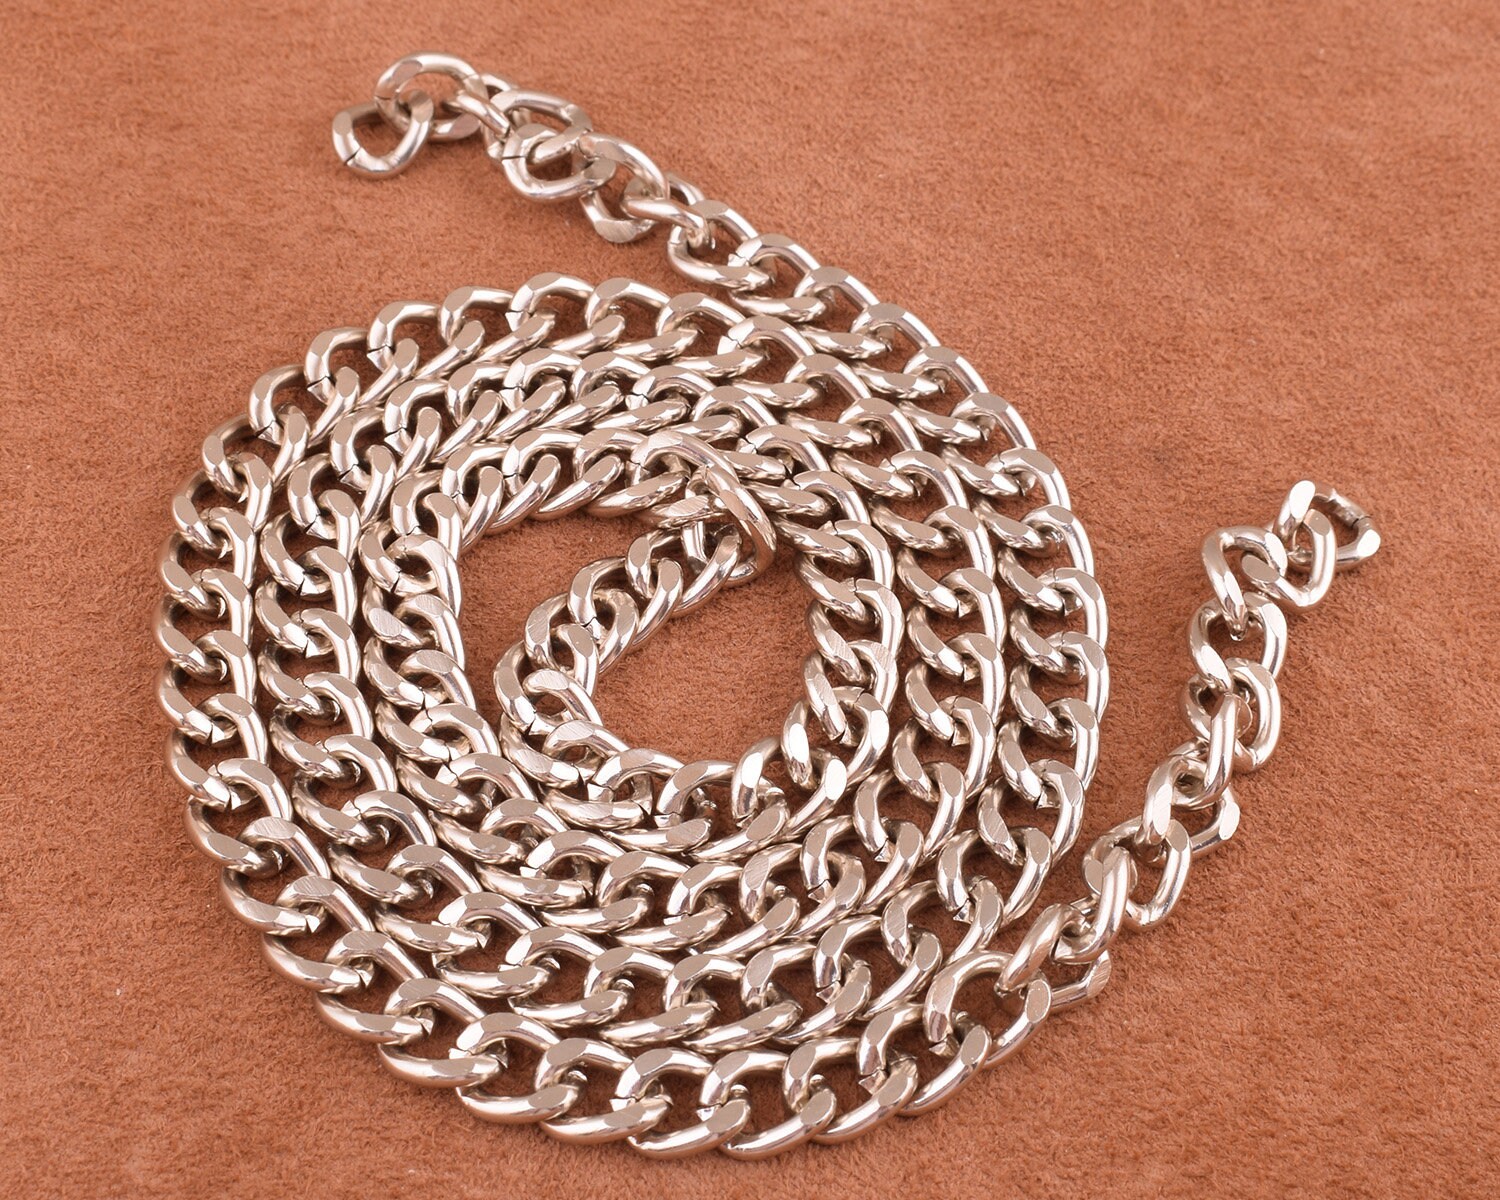 Silver Chunky Chain,purse Chain,replacement Chain,purse Chain Strap,handbag  Chain,metal Chain,heavy Chain,link Chain 